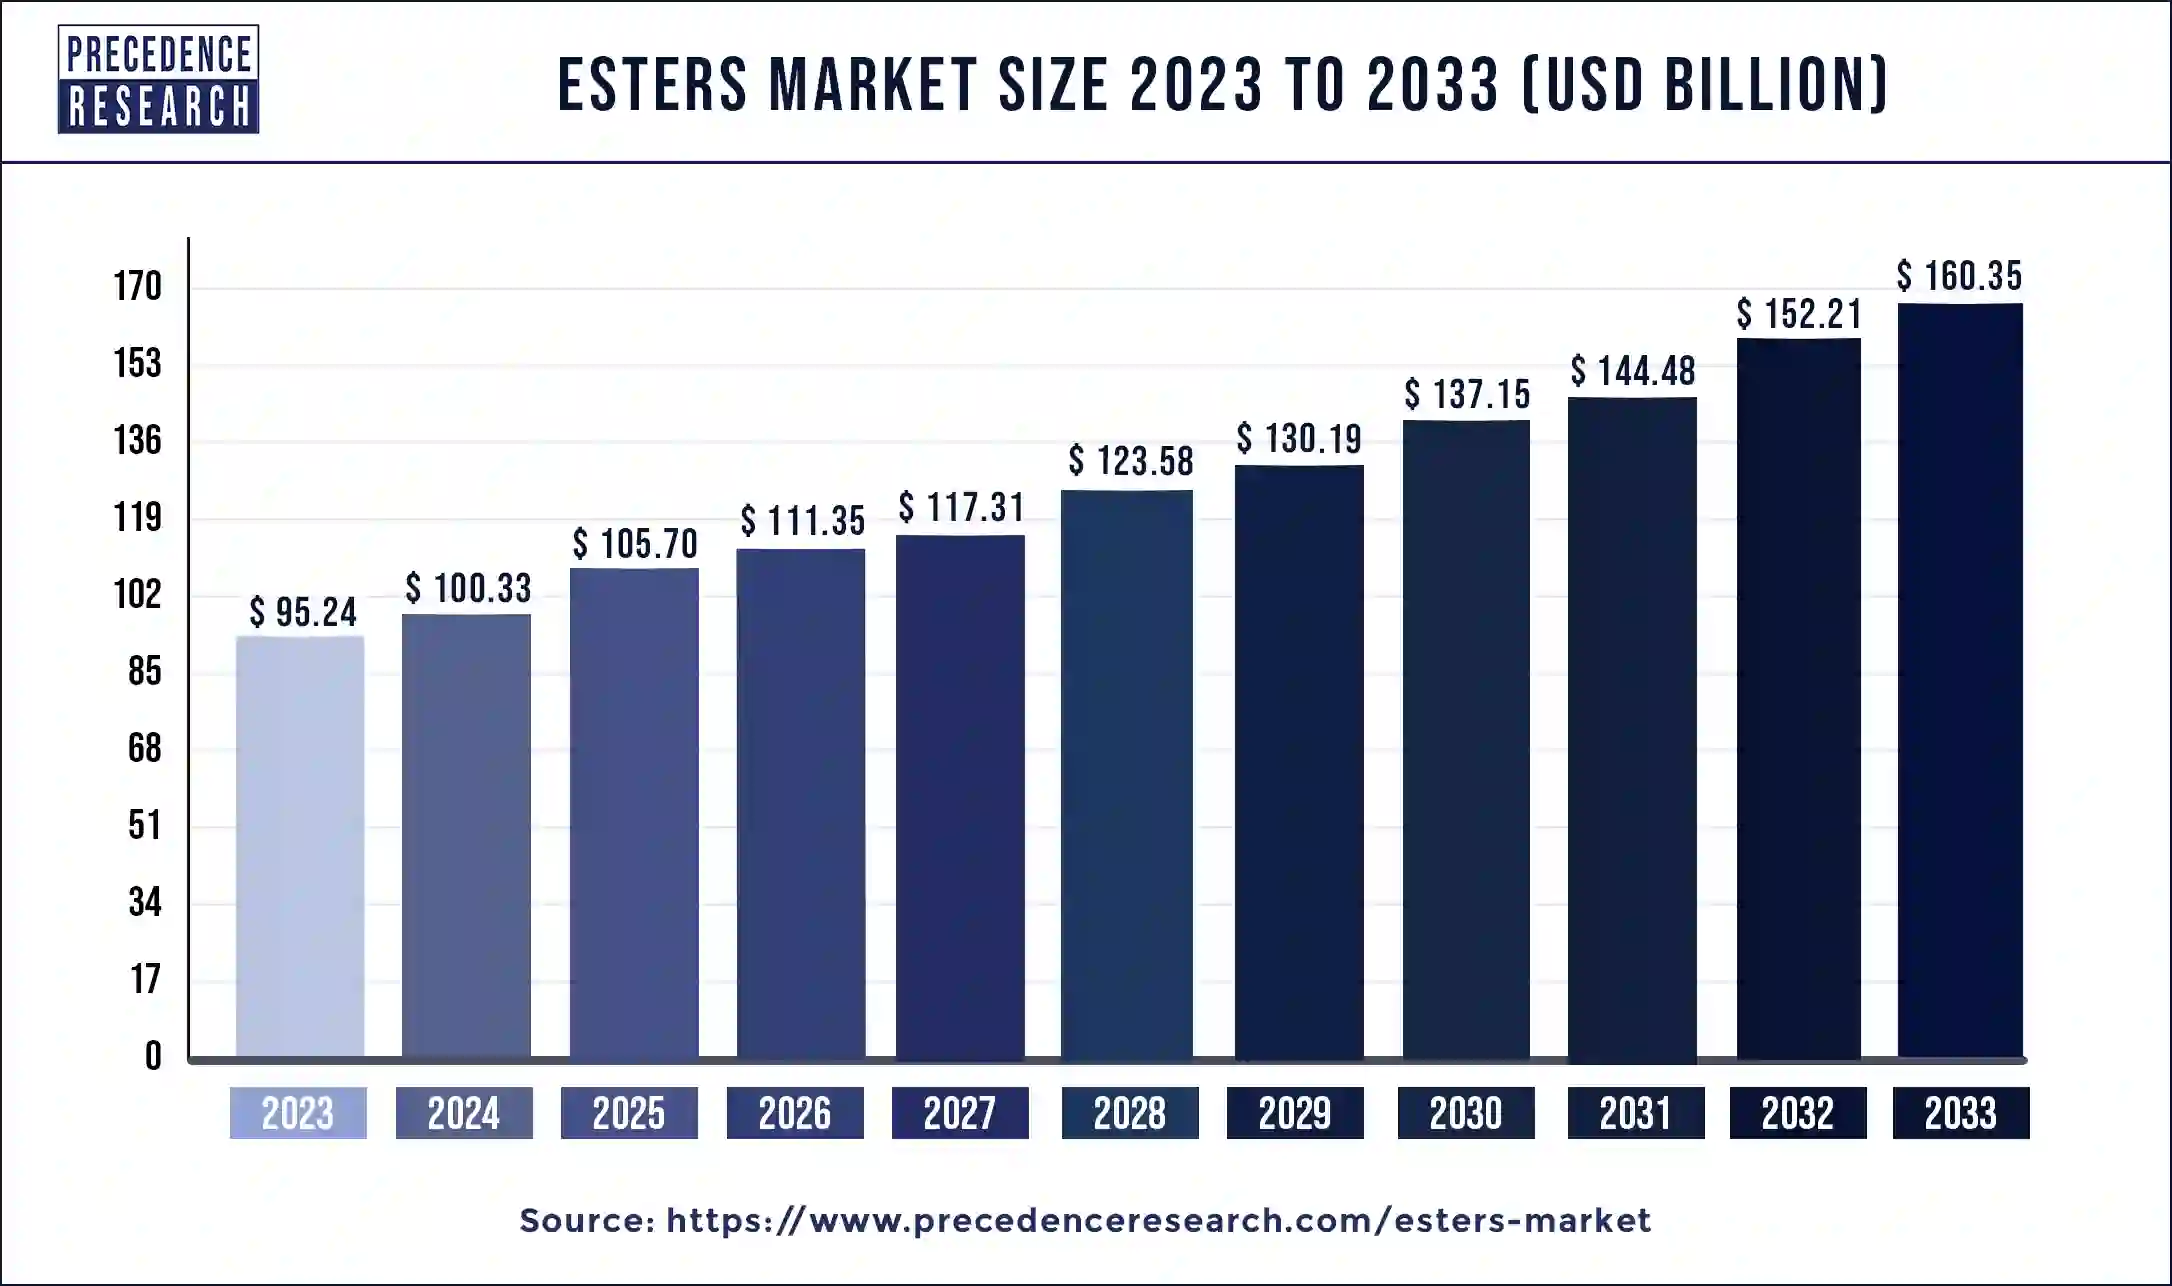 Esters Market Size 2024 to 2033